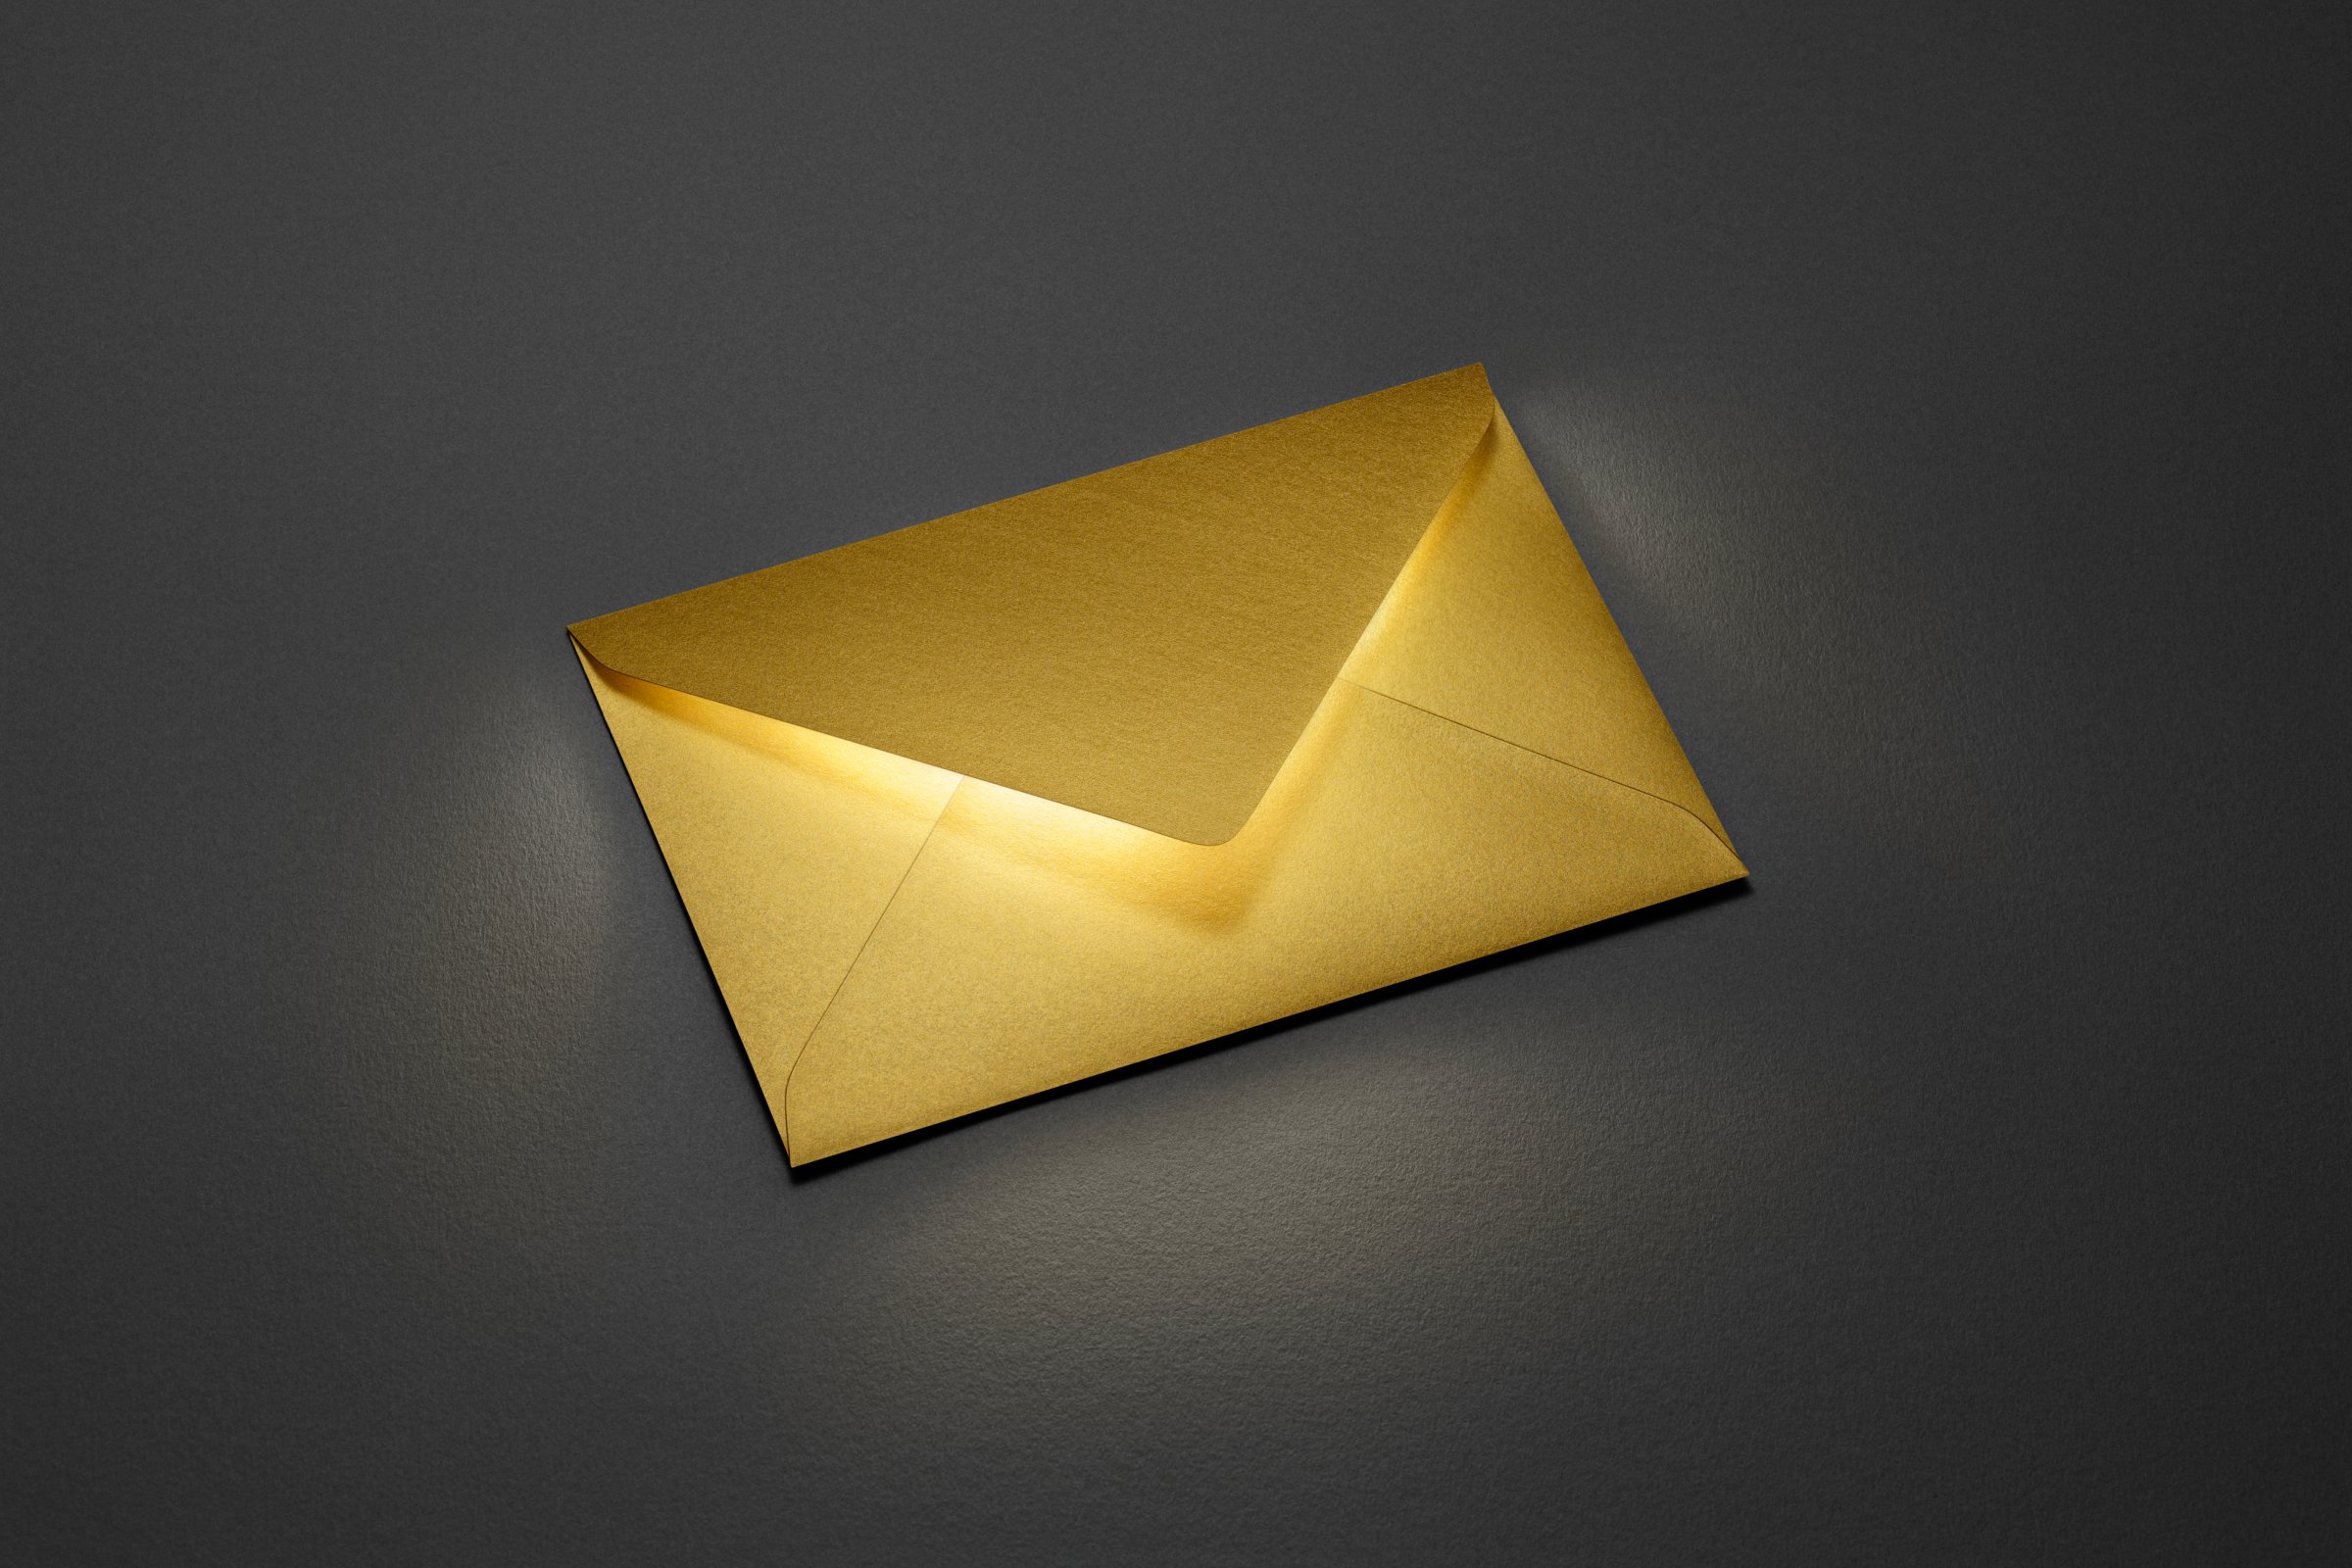 Light imitating from within the envelope